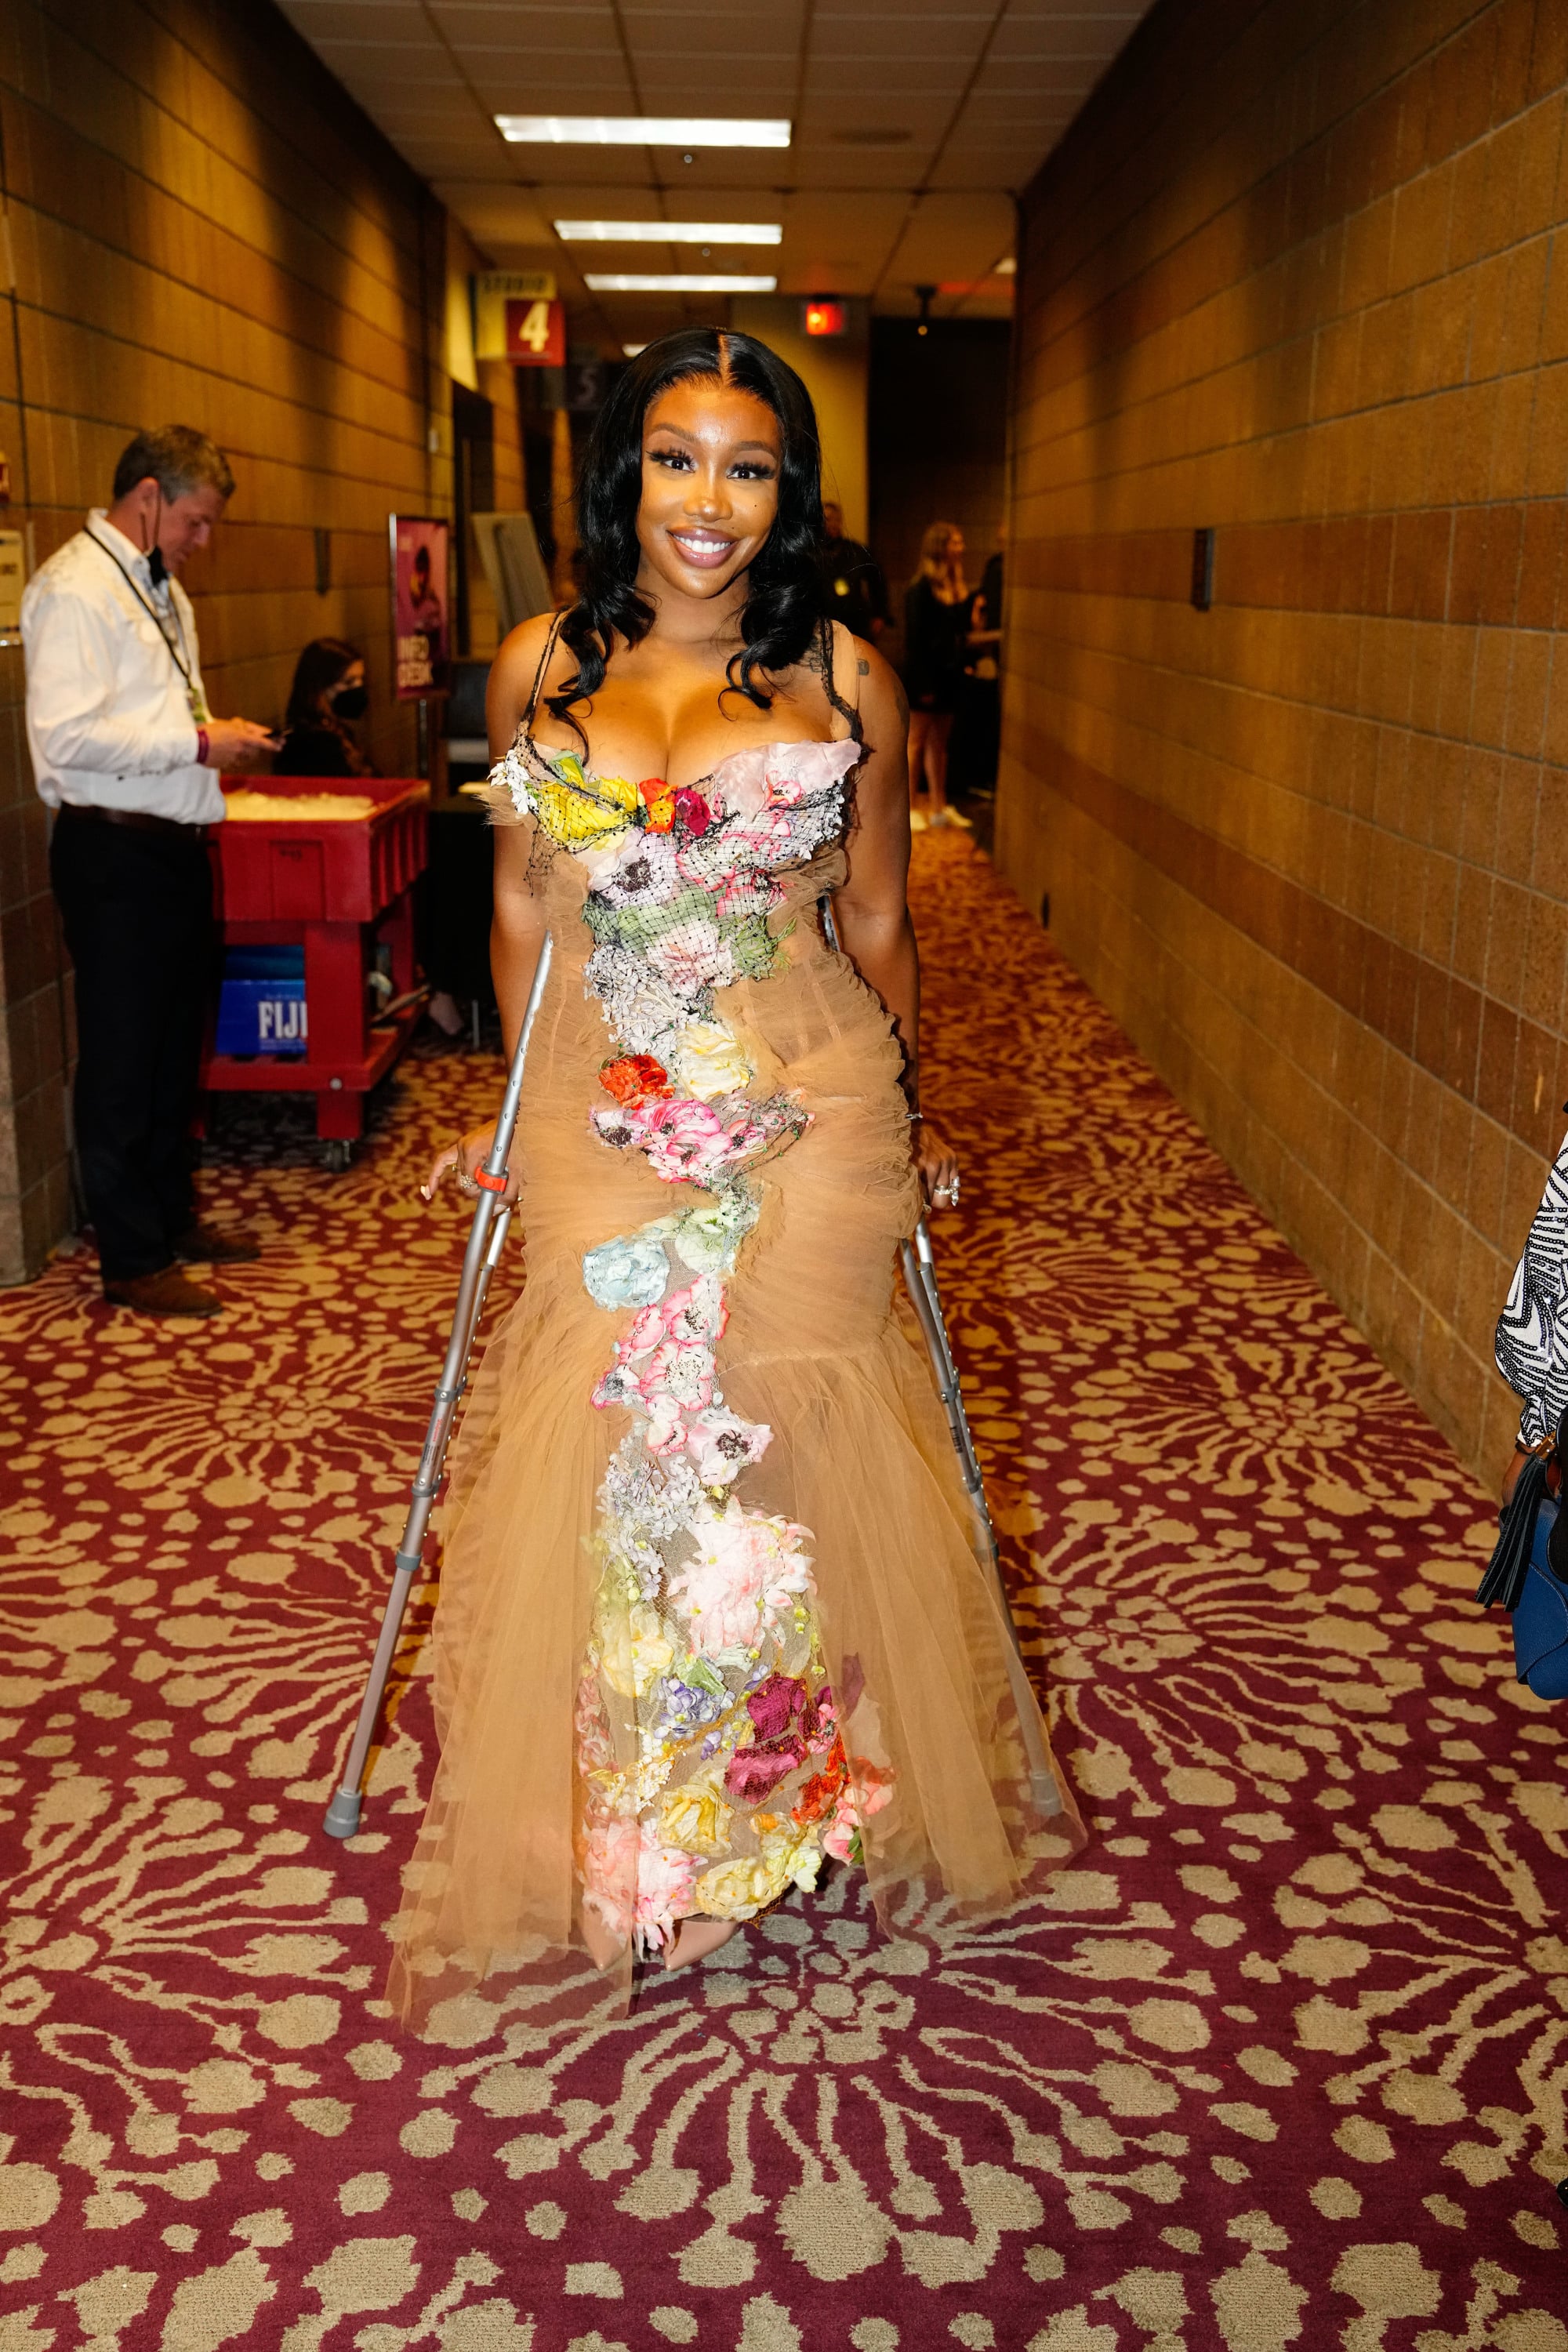 LAS VEGAS - APRIL 3: SZA at THE 64TH ANNUAL GRAMMY AWARDS, broadcasting live Sunday, April 3 (8:00-11:30 PM, LIVE ET/5:00-8:30 PM, LIVE PT) on the CBS Television Network, and available to stream live and on demand on Paramount+*. (Photo by Eric Jamison/CBS via Getty Images)